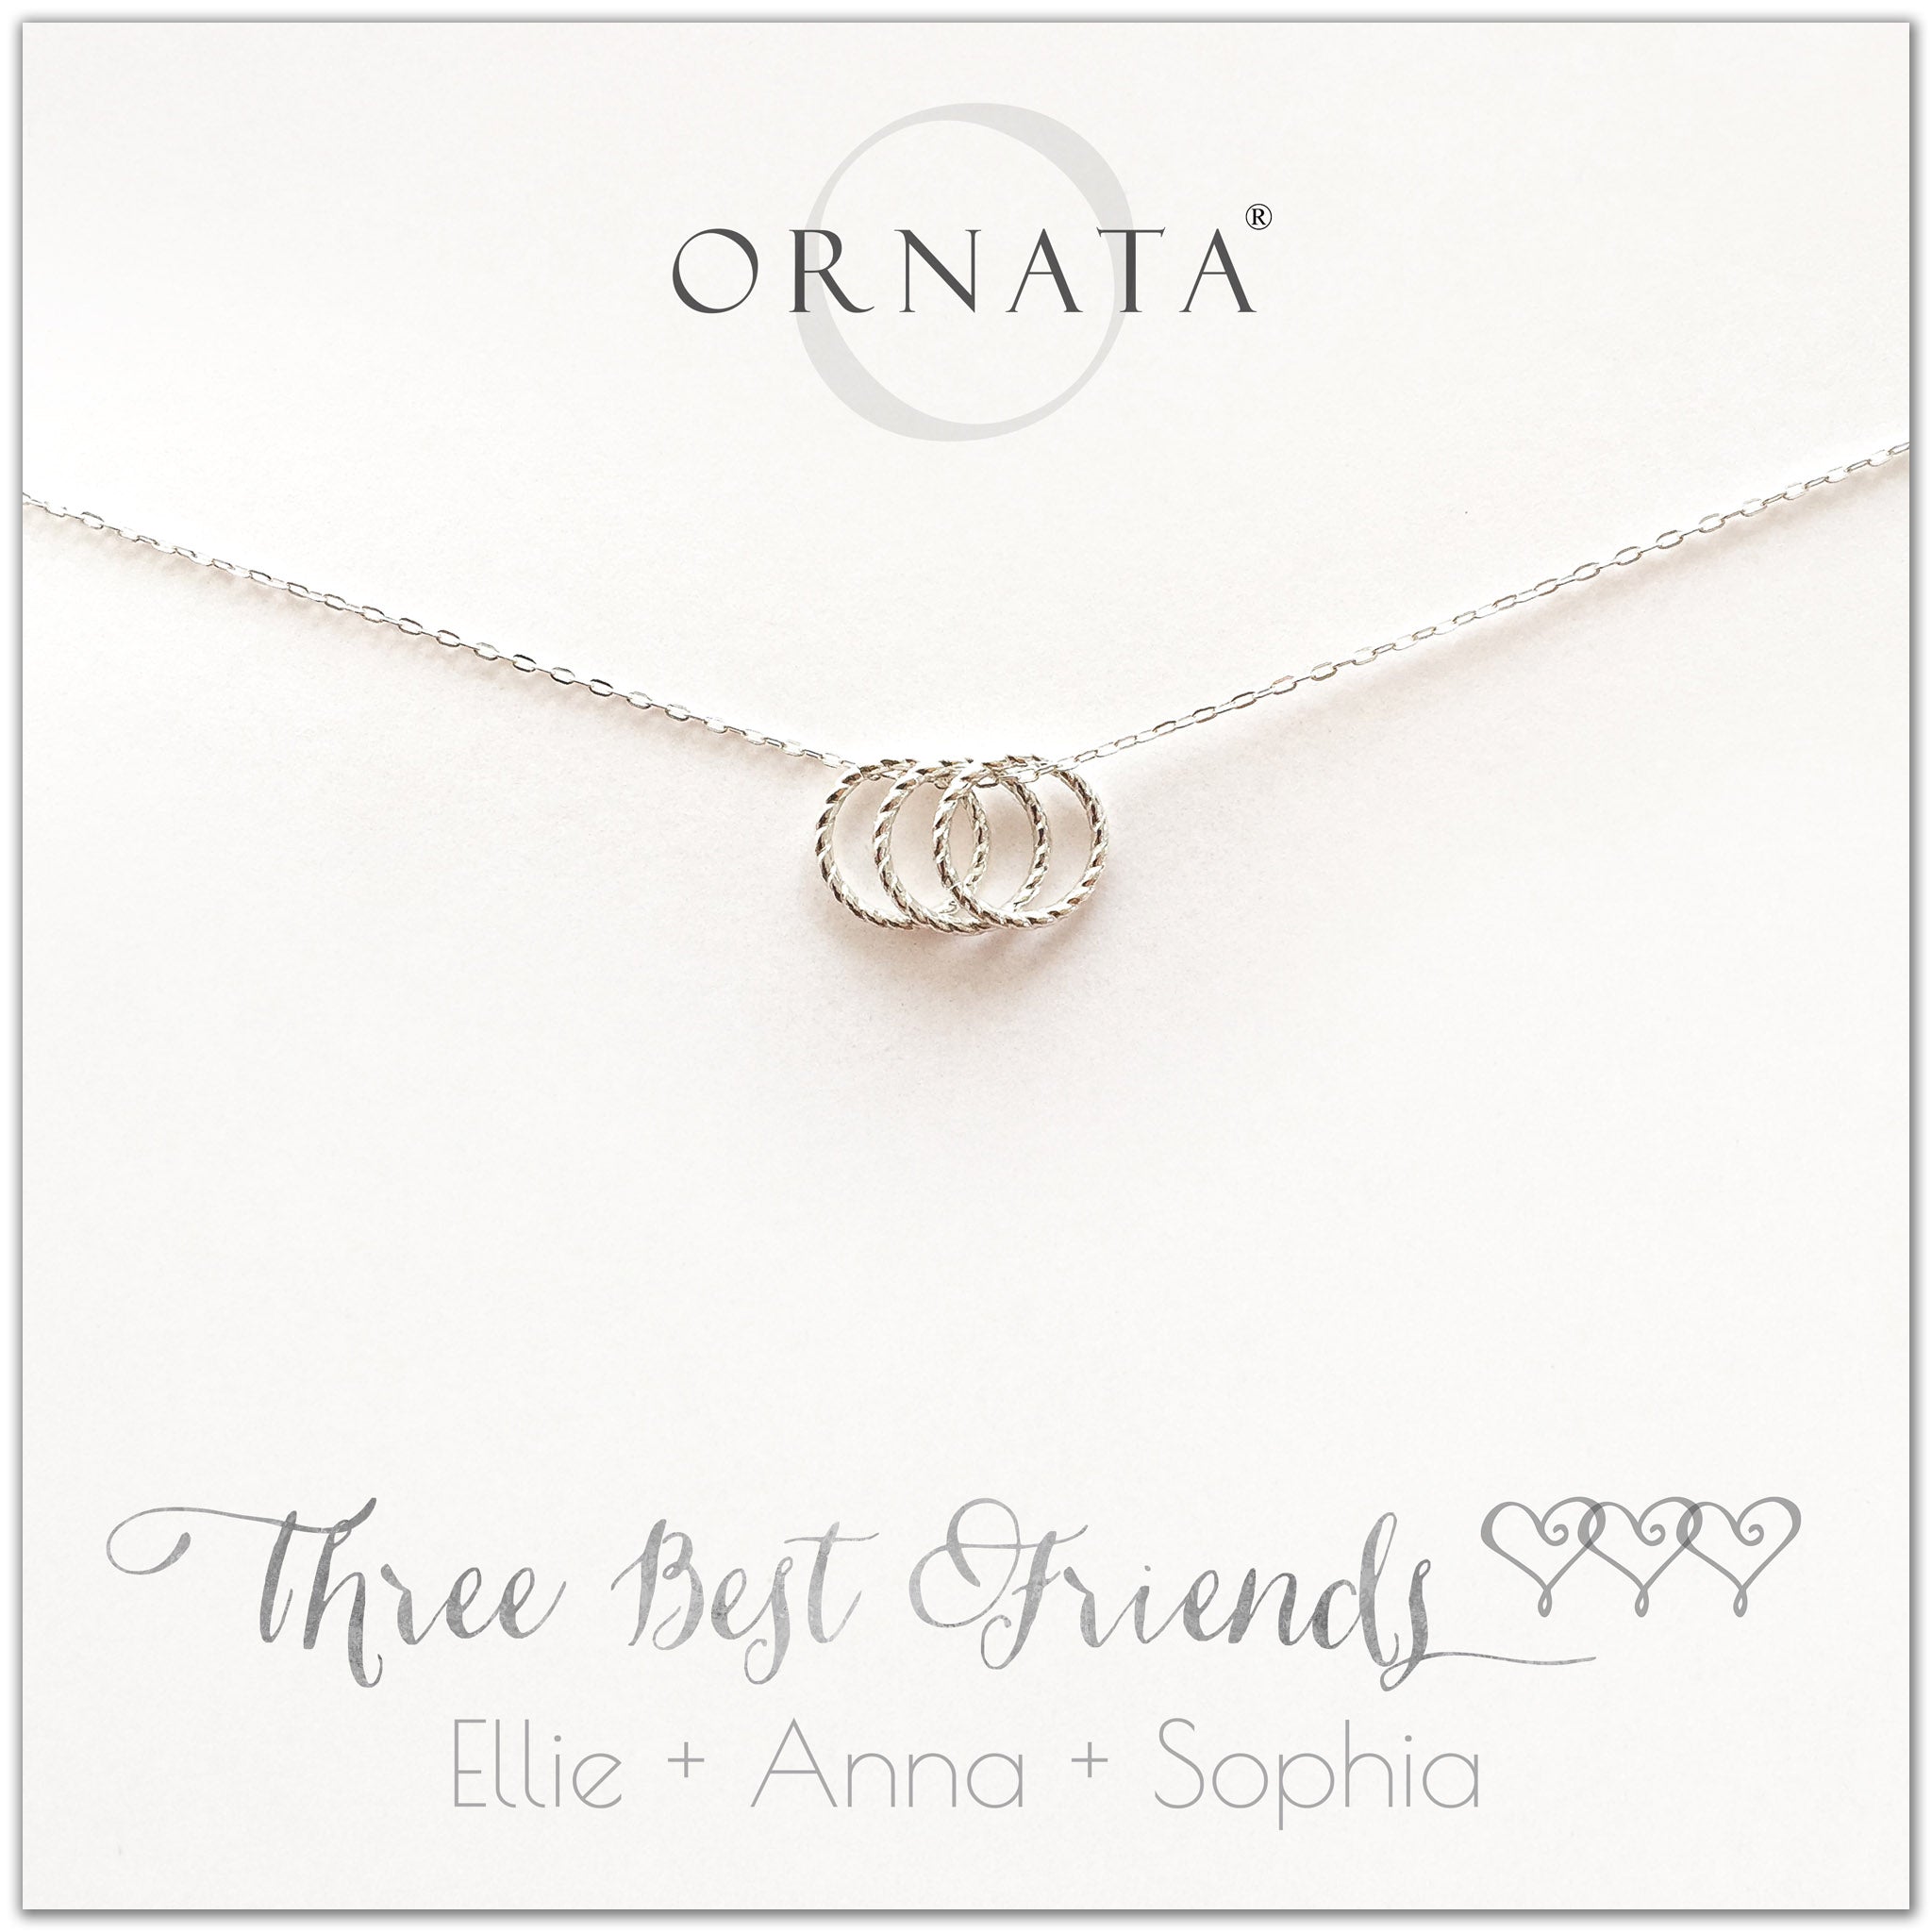 Personalized three best friends necklace. Our sterling silver custom jewelry is a perfect gift for best friends, sisters, and BFFs - symbolic necklace to represent three best friends with three silver interlocking rings. Good gift for best friend or sister.